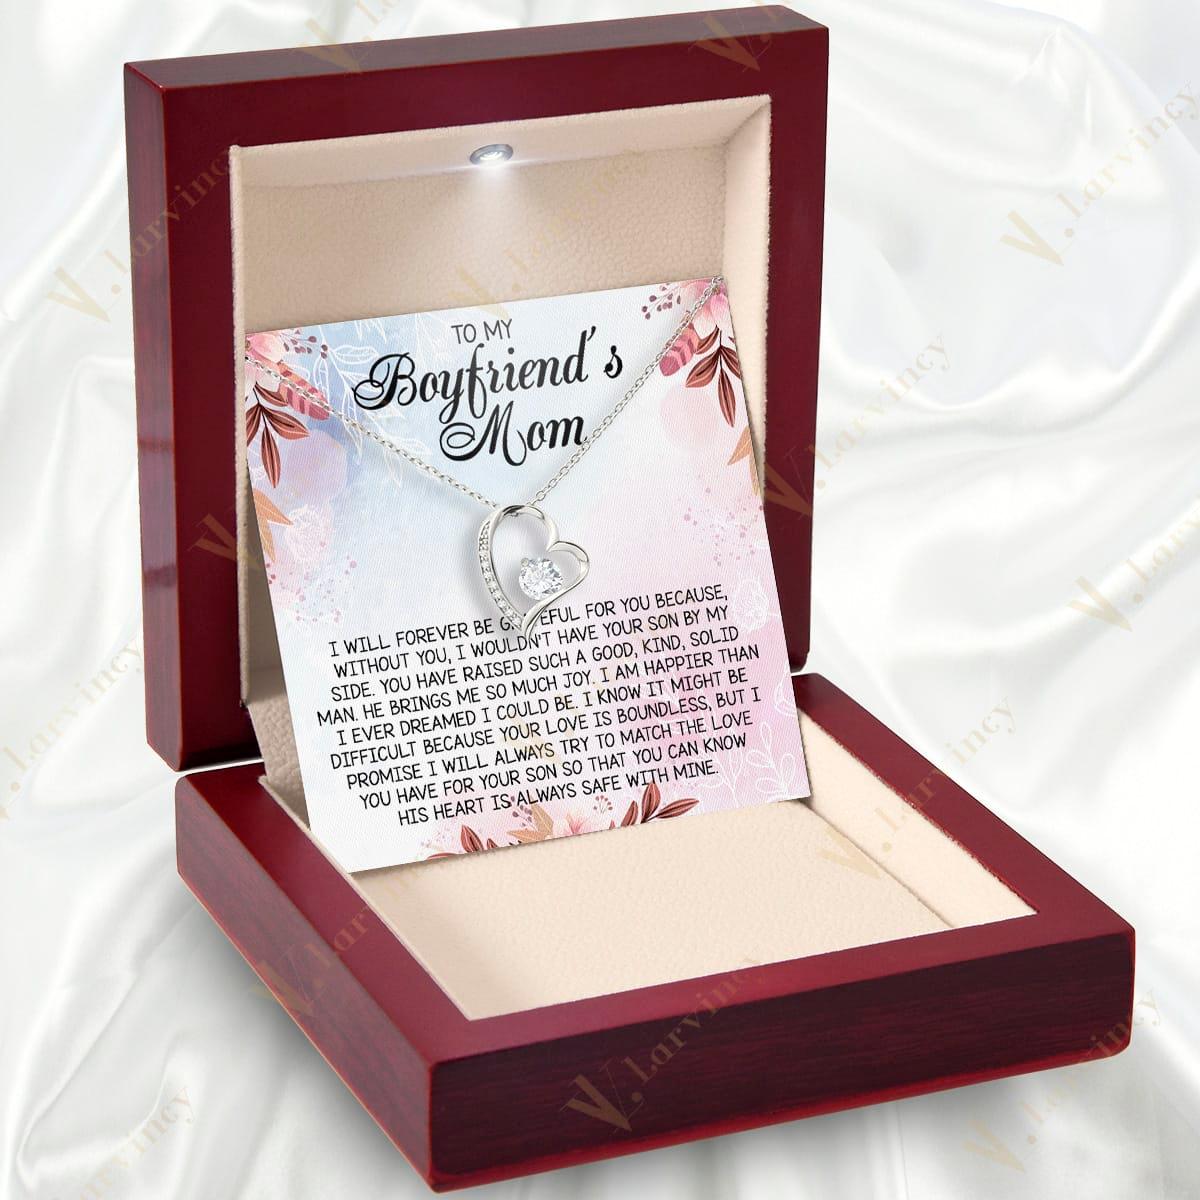 To My Boyfriend Mom Necklace, Jewelry Boyfriend's Mom Gifts, Boyfriends Mom Christmas Gifts From Girlfriend With Gift Box Personalized Message Card, Love Is Boundless - Larvincy Jewel